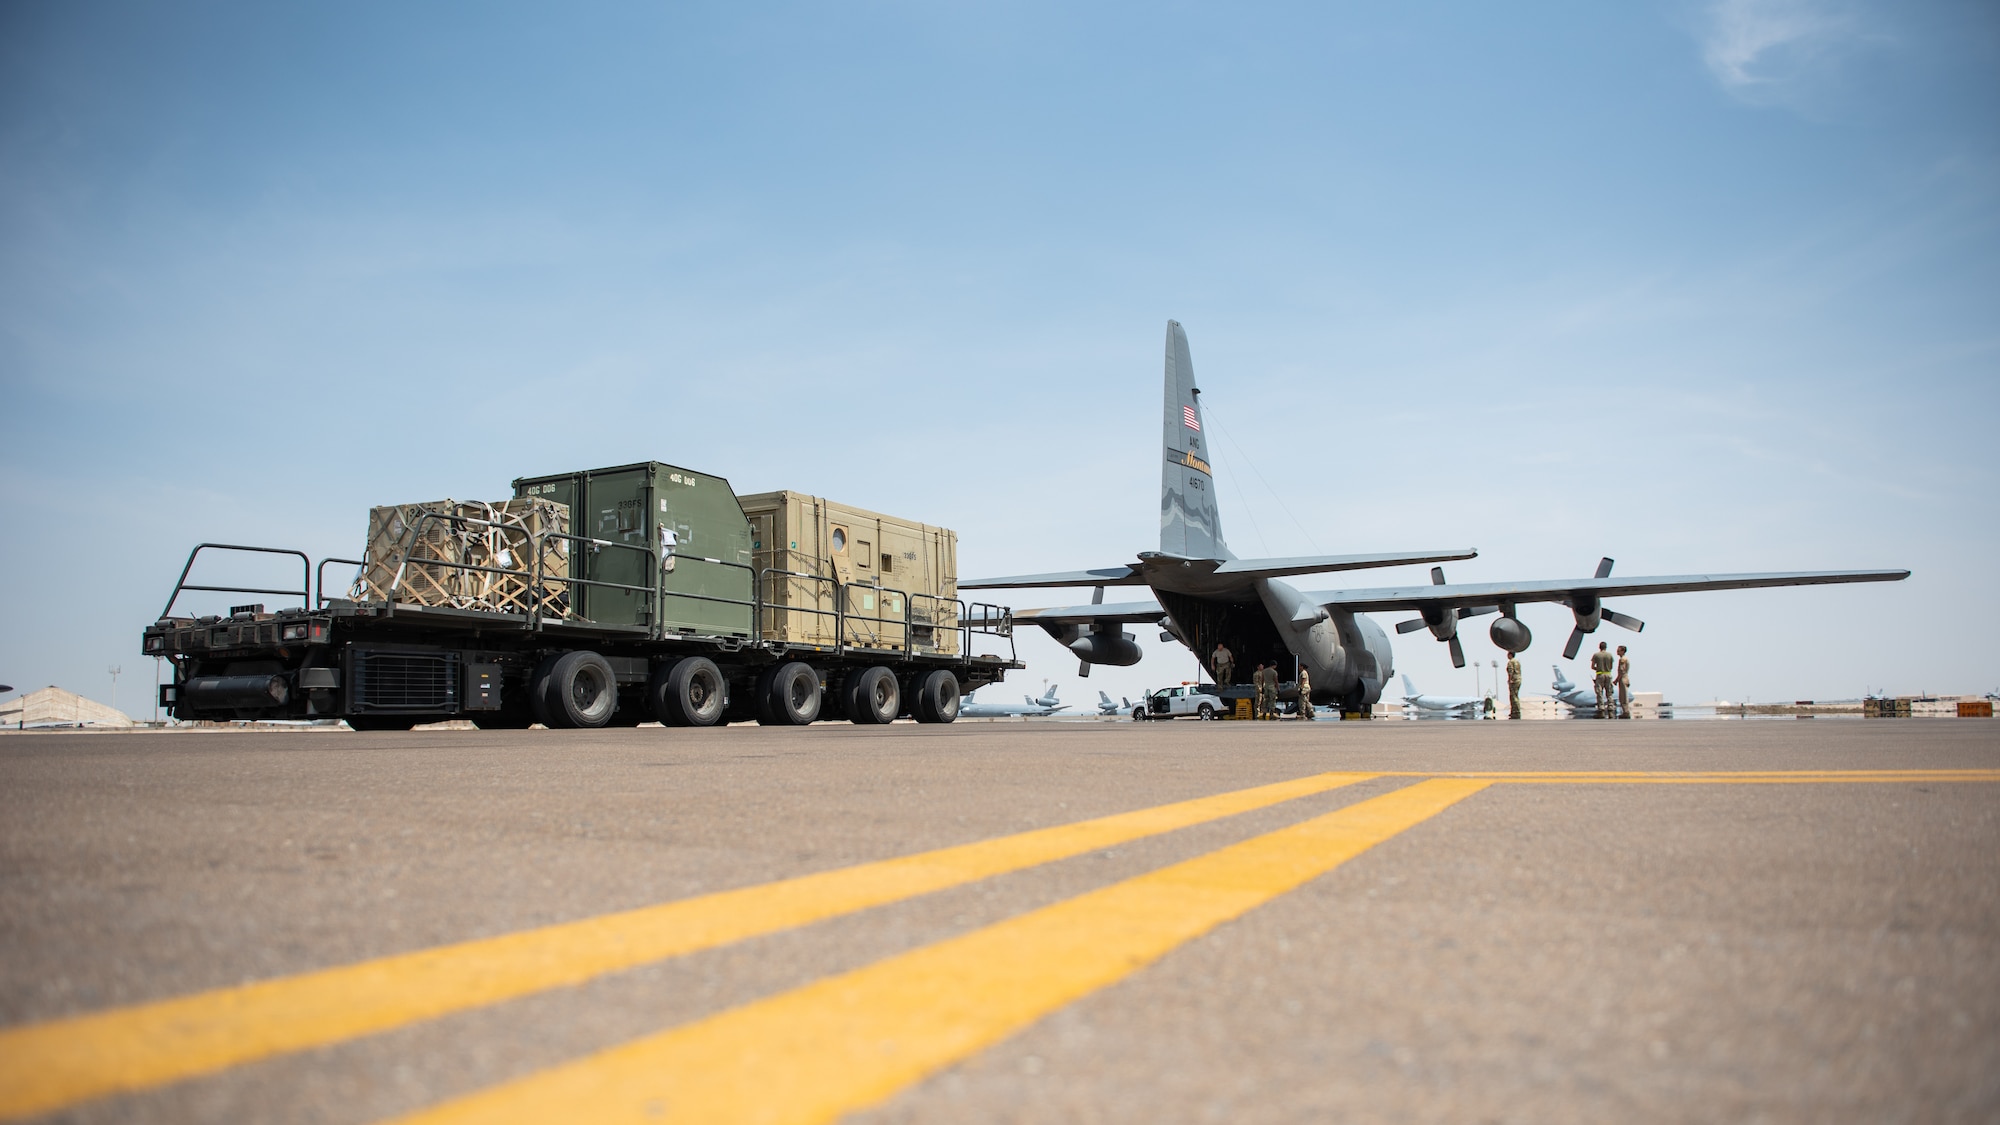 380th Expeditionary Logistics Readiness Squadron air transportation specialists prepare to load a C-130 Hercules Sept. 17, 2019, at Al Dhafra Air Base, United Arab Emirates. The Air Transportation Operations Center enables Airmen to travel and fulfill duty requirements and taskings throughout the area of responsibility. (U.S. Air Force photo by Staff Sgt. Chris Thornbury)